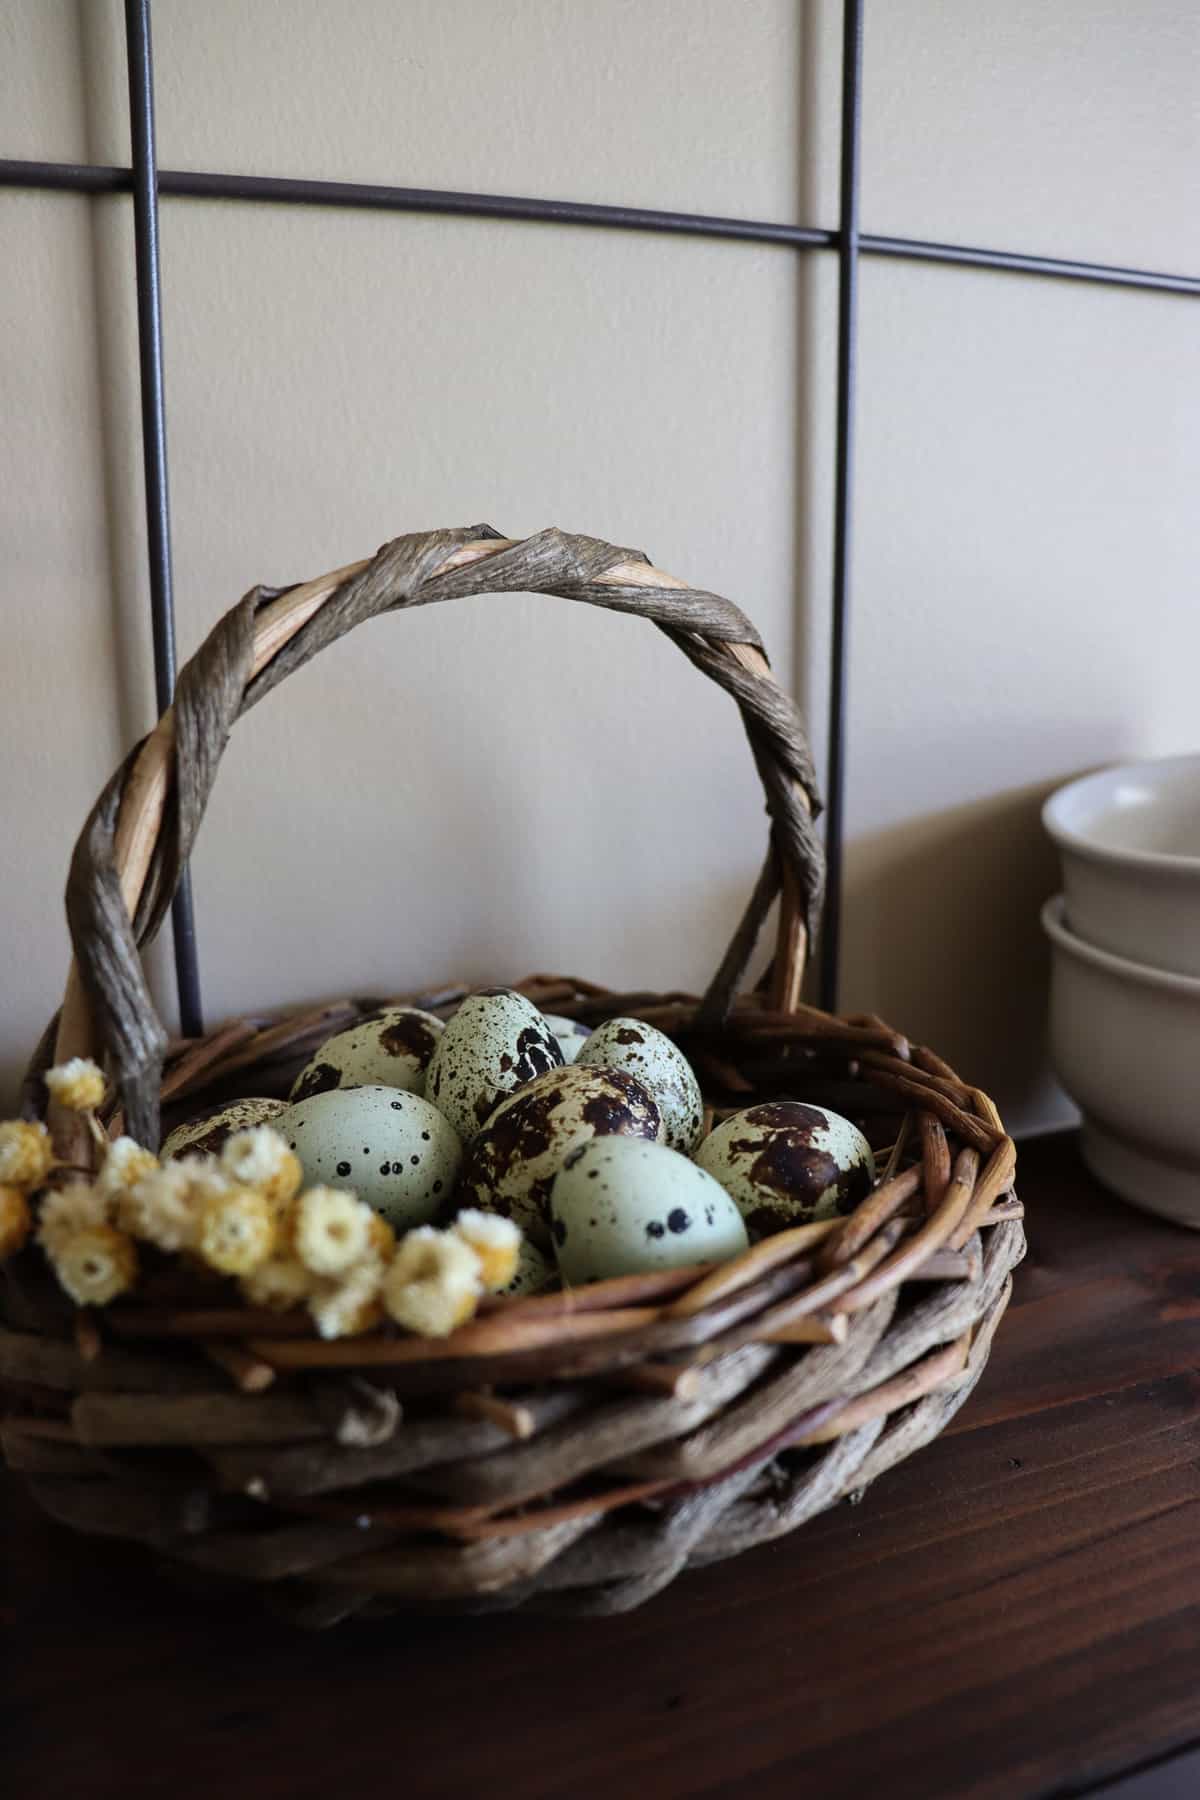 blown eggs in a basket with dried flowers on a shelf